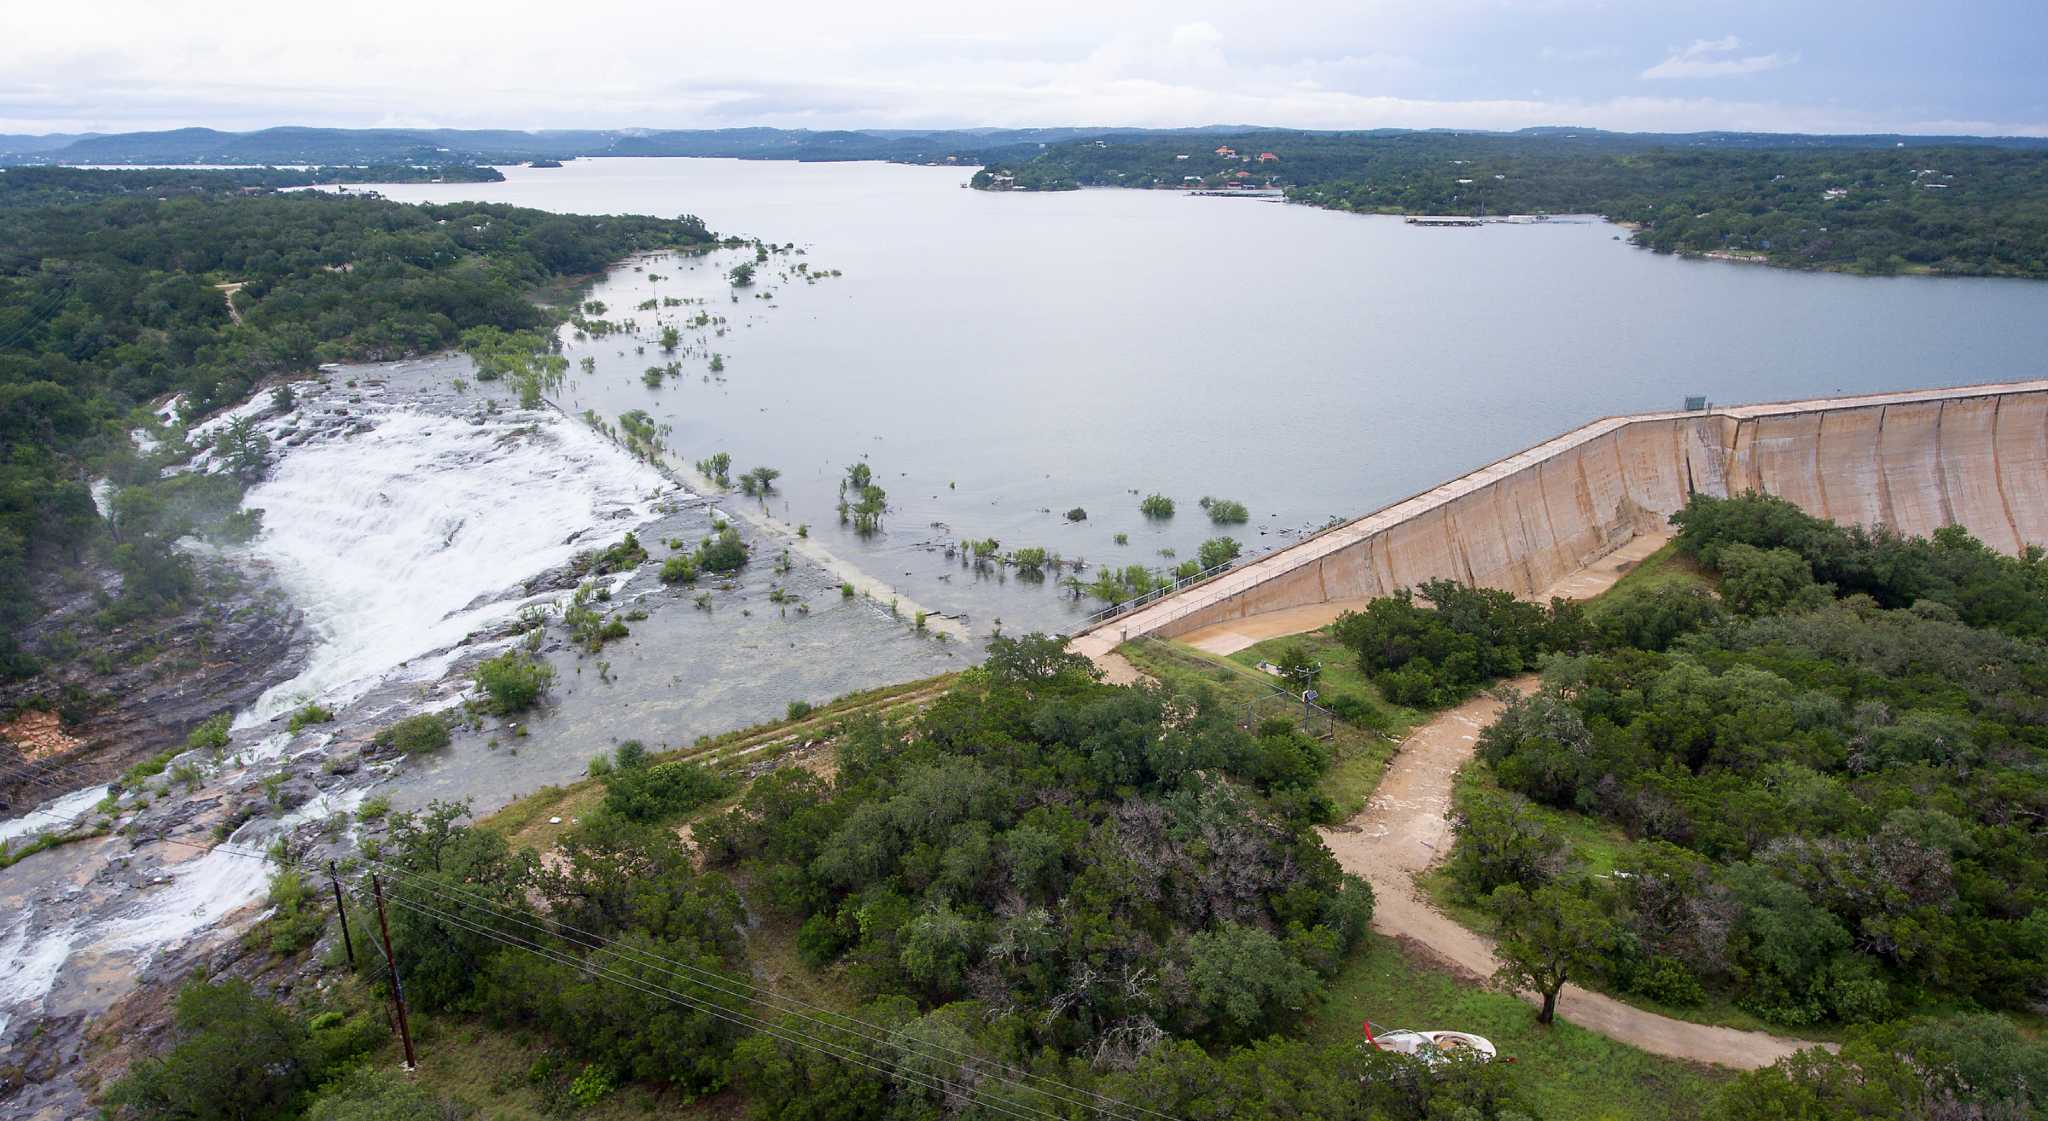 Drone footage shows completely full Medina Lake Texans have 'been